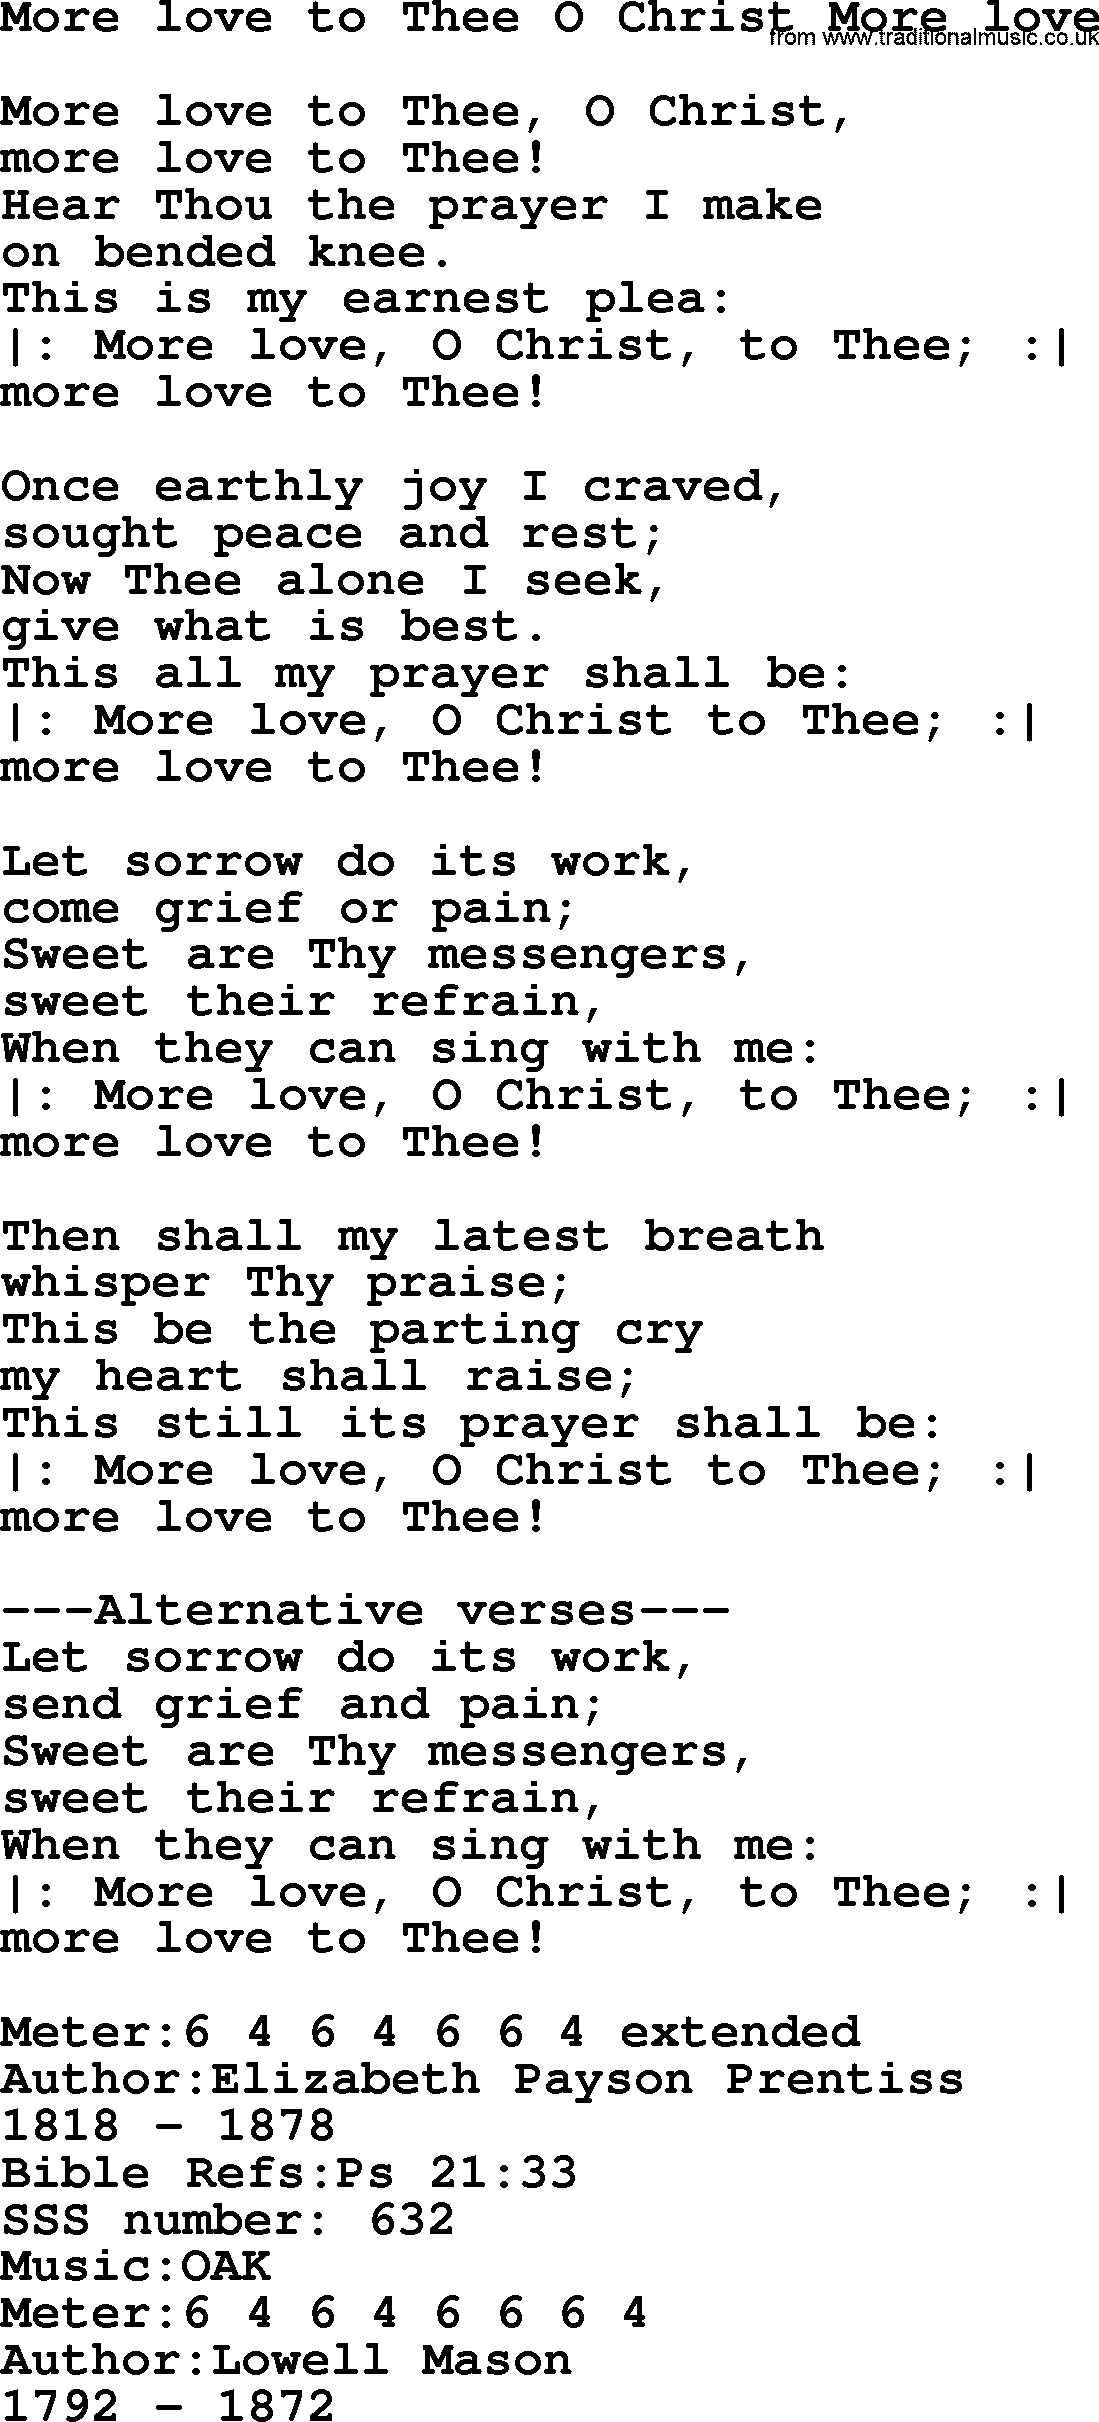 Sacred Songs and Solos complete, 1200 Hymns, title: More Love To Thee O Christ More Love, lyrics and PDF